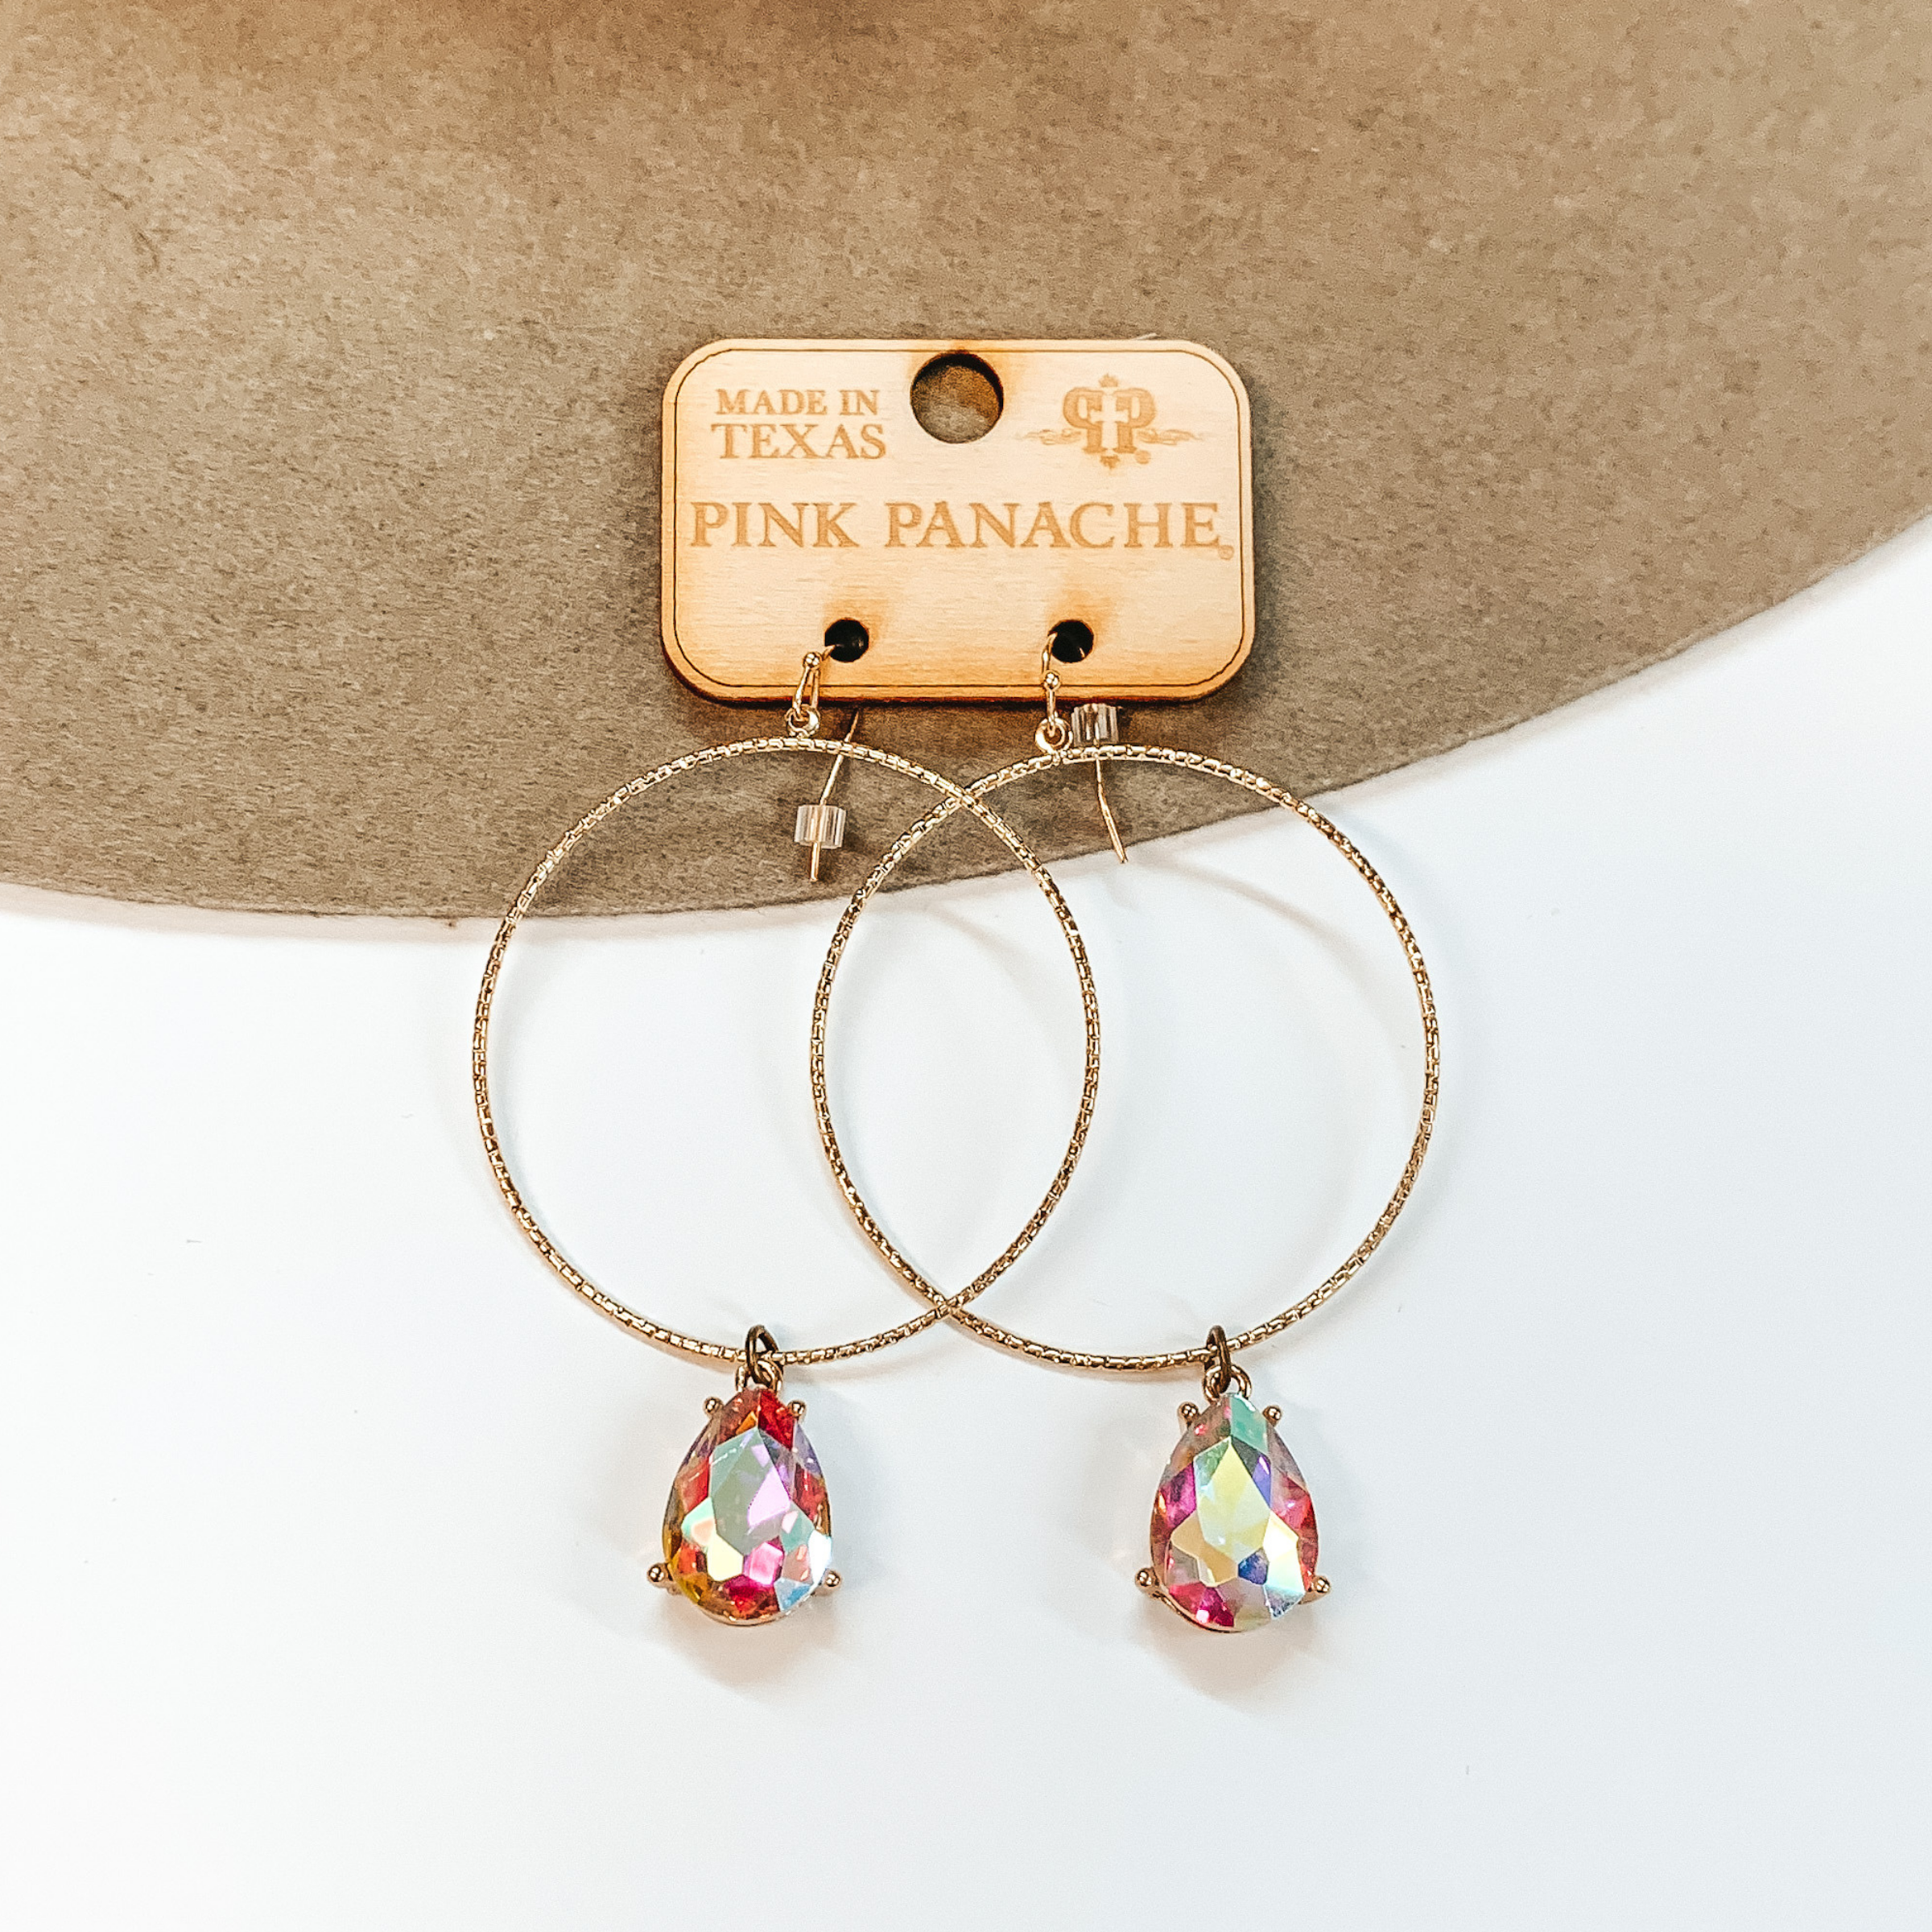 A pair of textured gold hoop earrings that have a colorful crystal dangle. Pictured on a beige hat on a white background.